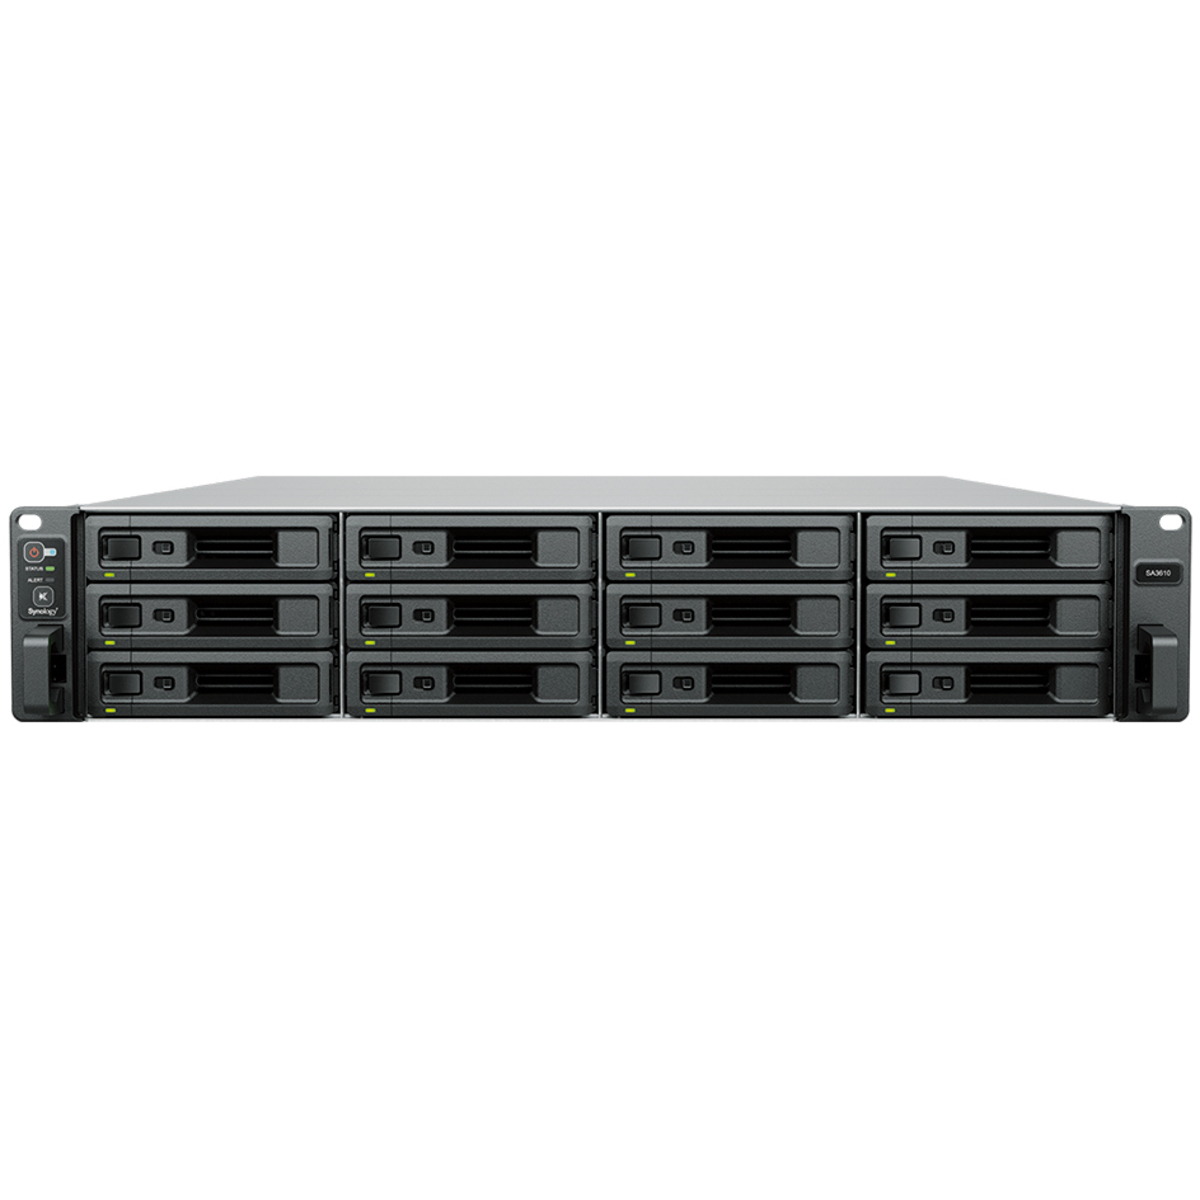 Synology RackStation SA3410 40tb 12-Bay RackMount Large Business / Enterprise NAS - Network Attached Storage Device 10x4tb Seagate EXOS 7E10 ST4000NM024B 3.5 7200rpm SATA 6Gb/s HDD ENTERPRISE Class Drives Installed - Burn-In Tested RackStation SA3410